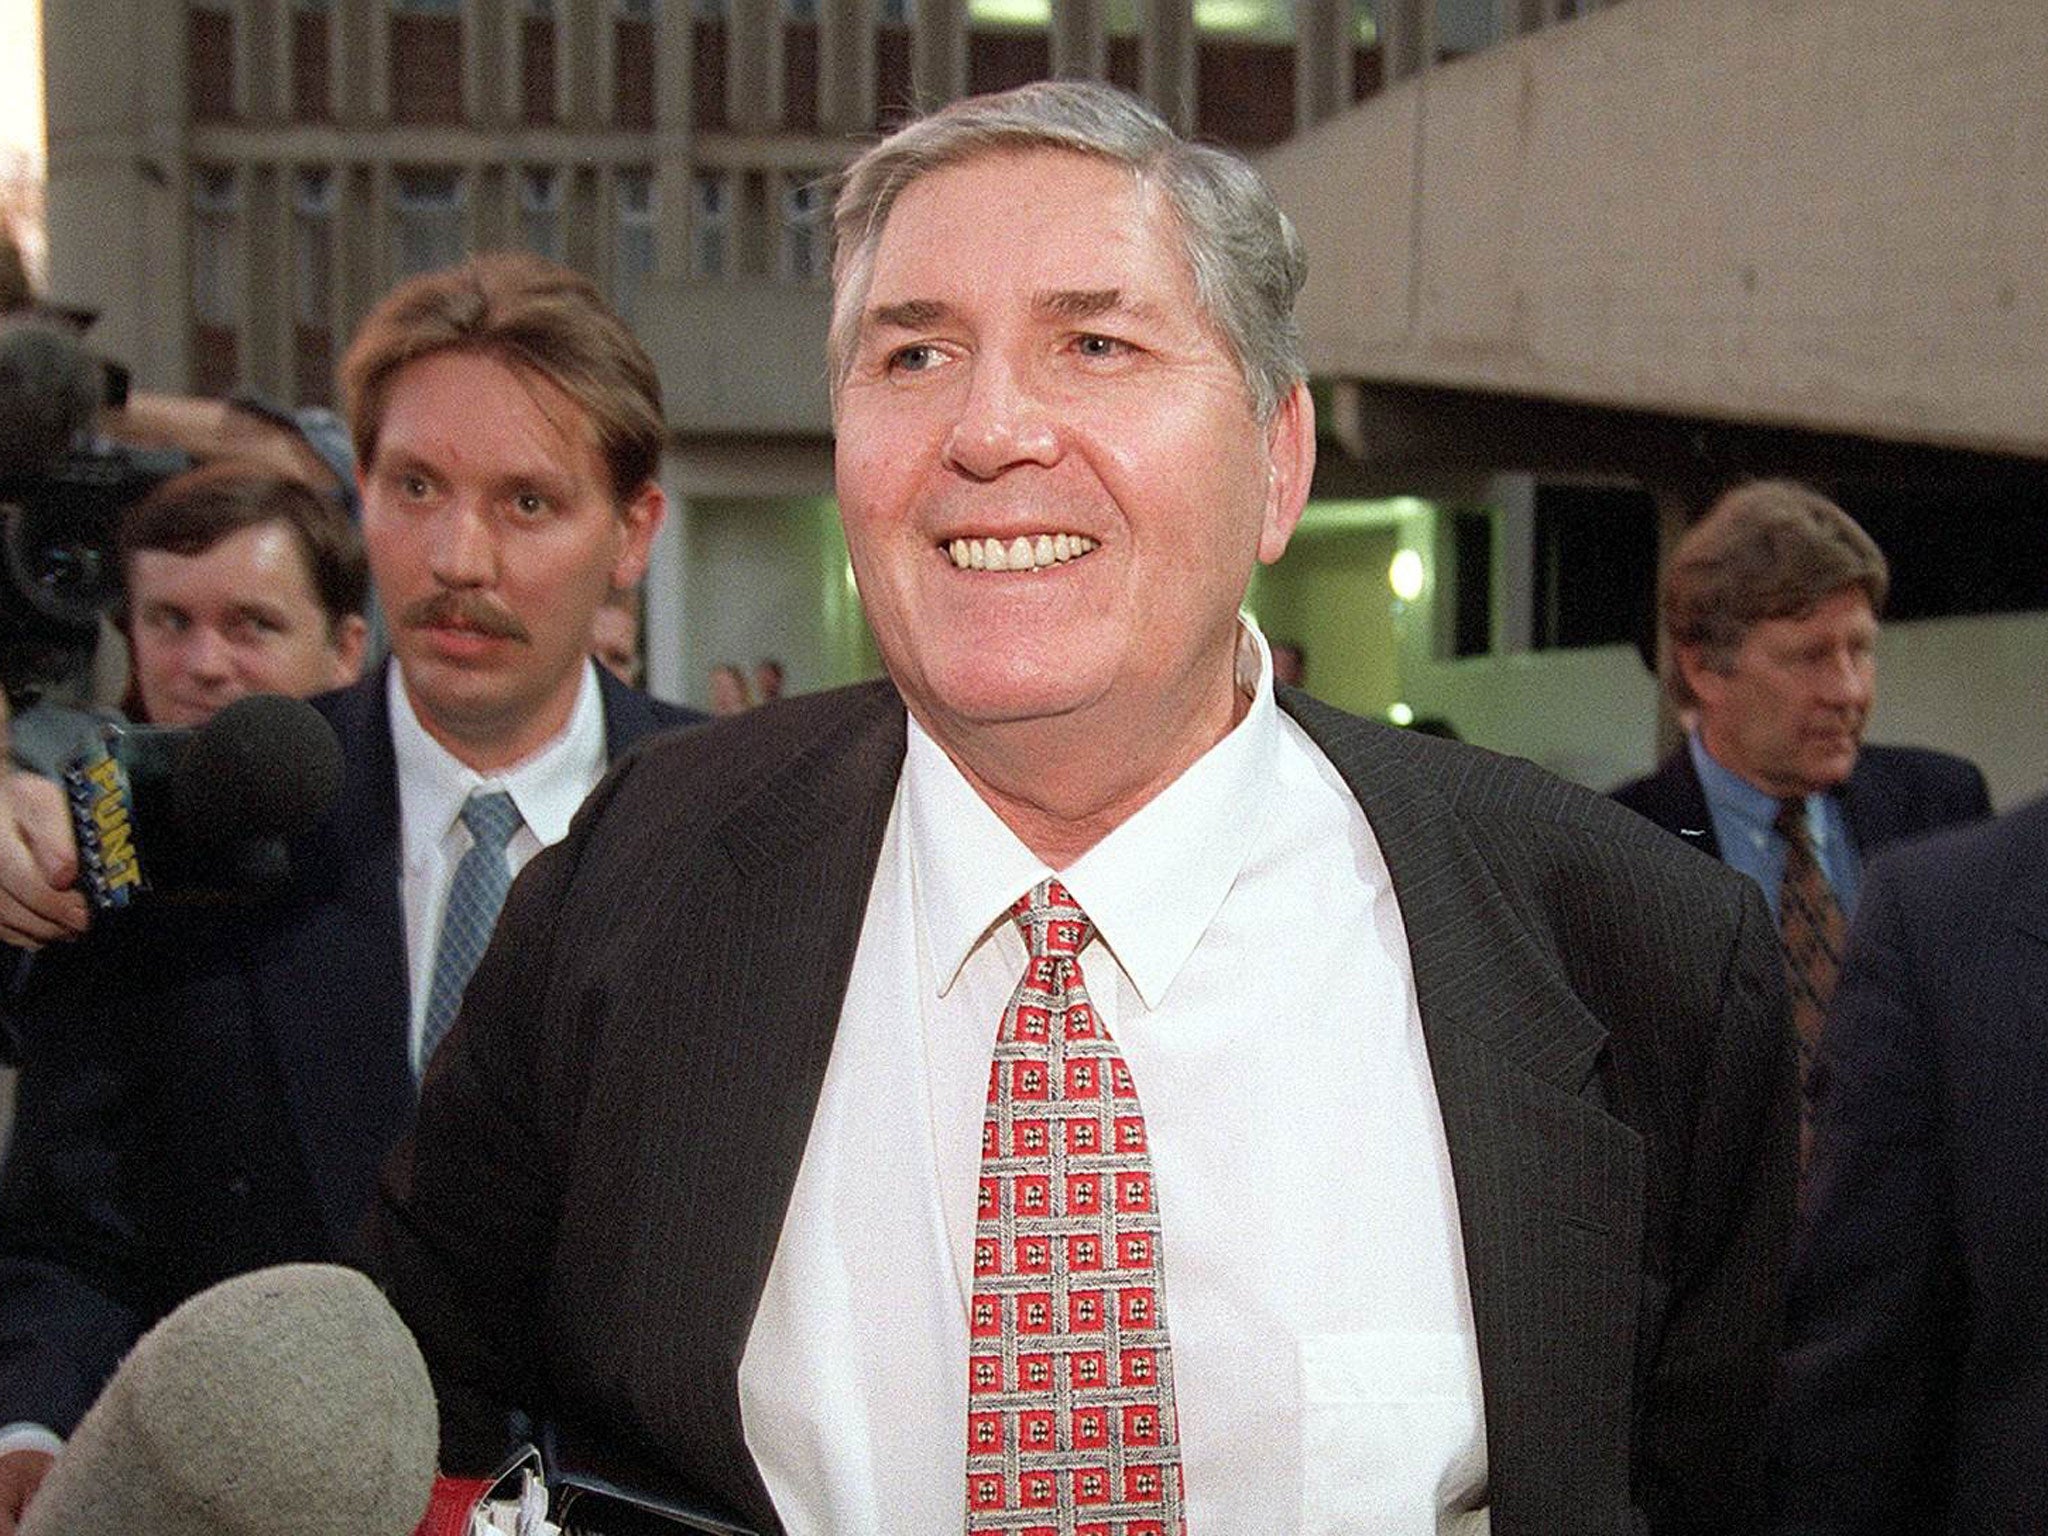 Luyt in 1998 after resigning as head of South African rugby